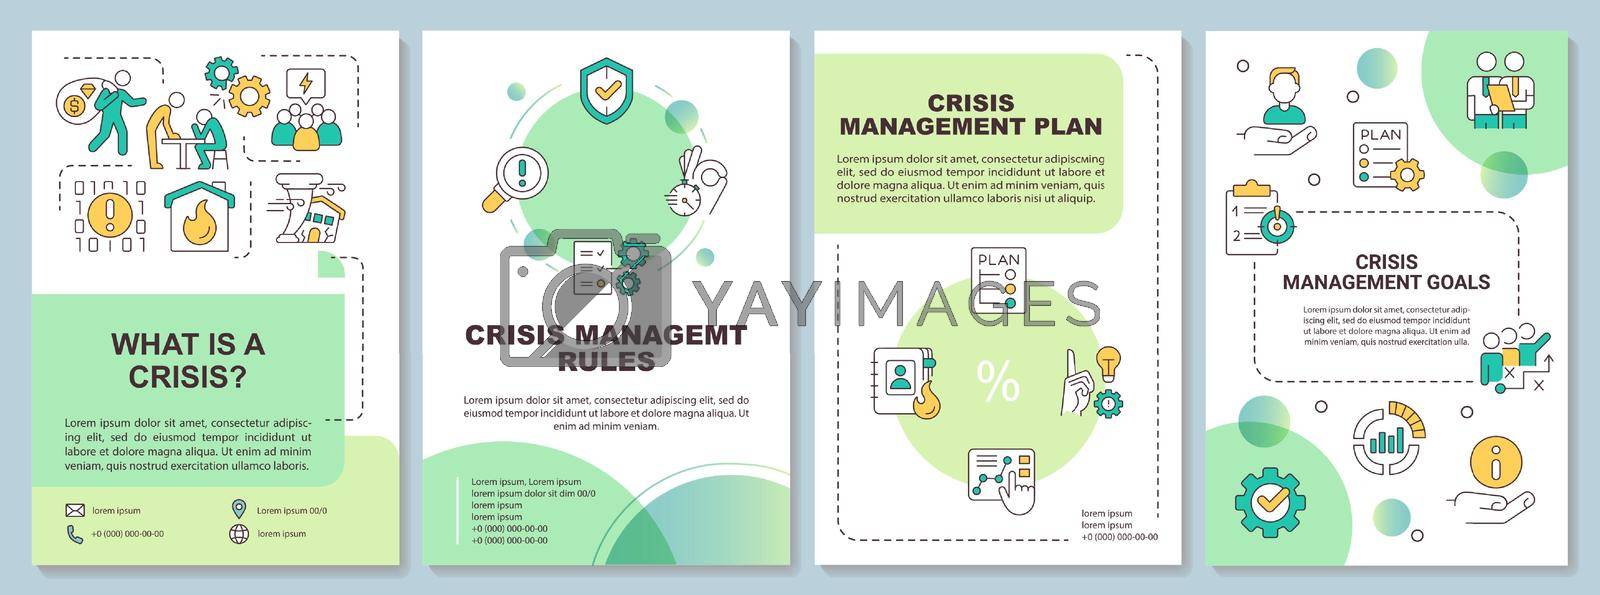 Royalty free image of Crisis management process green brochure template by bsd